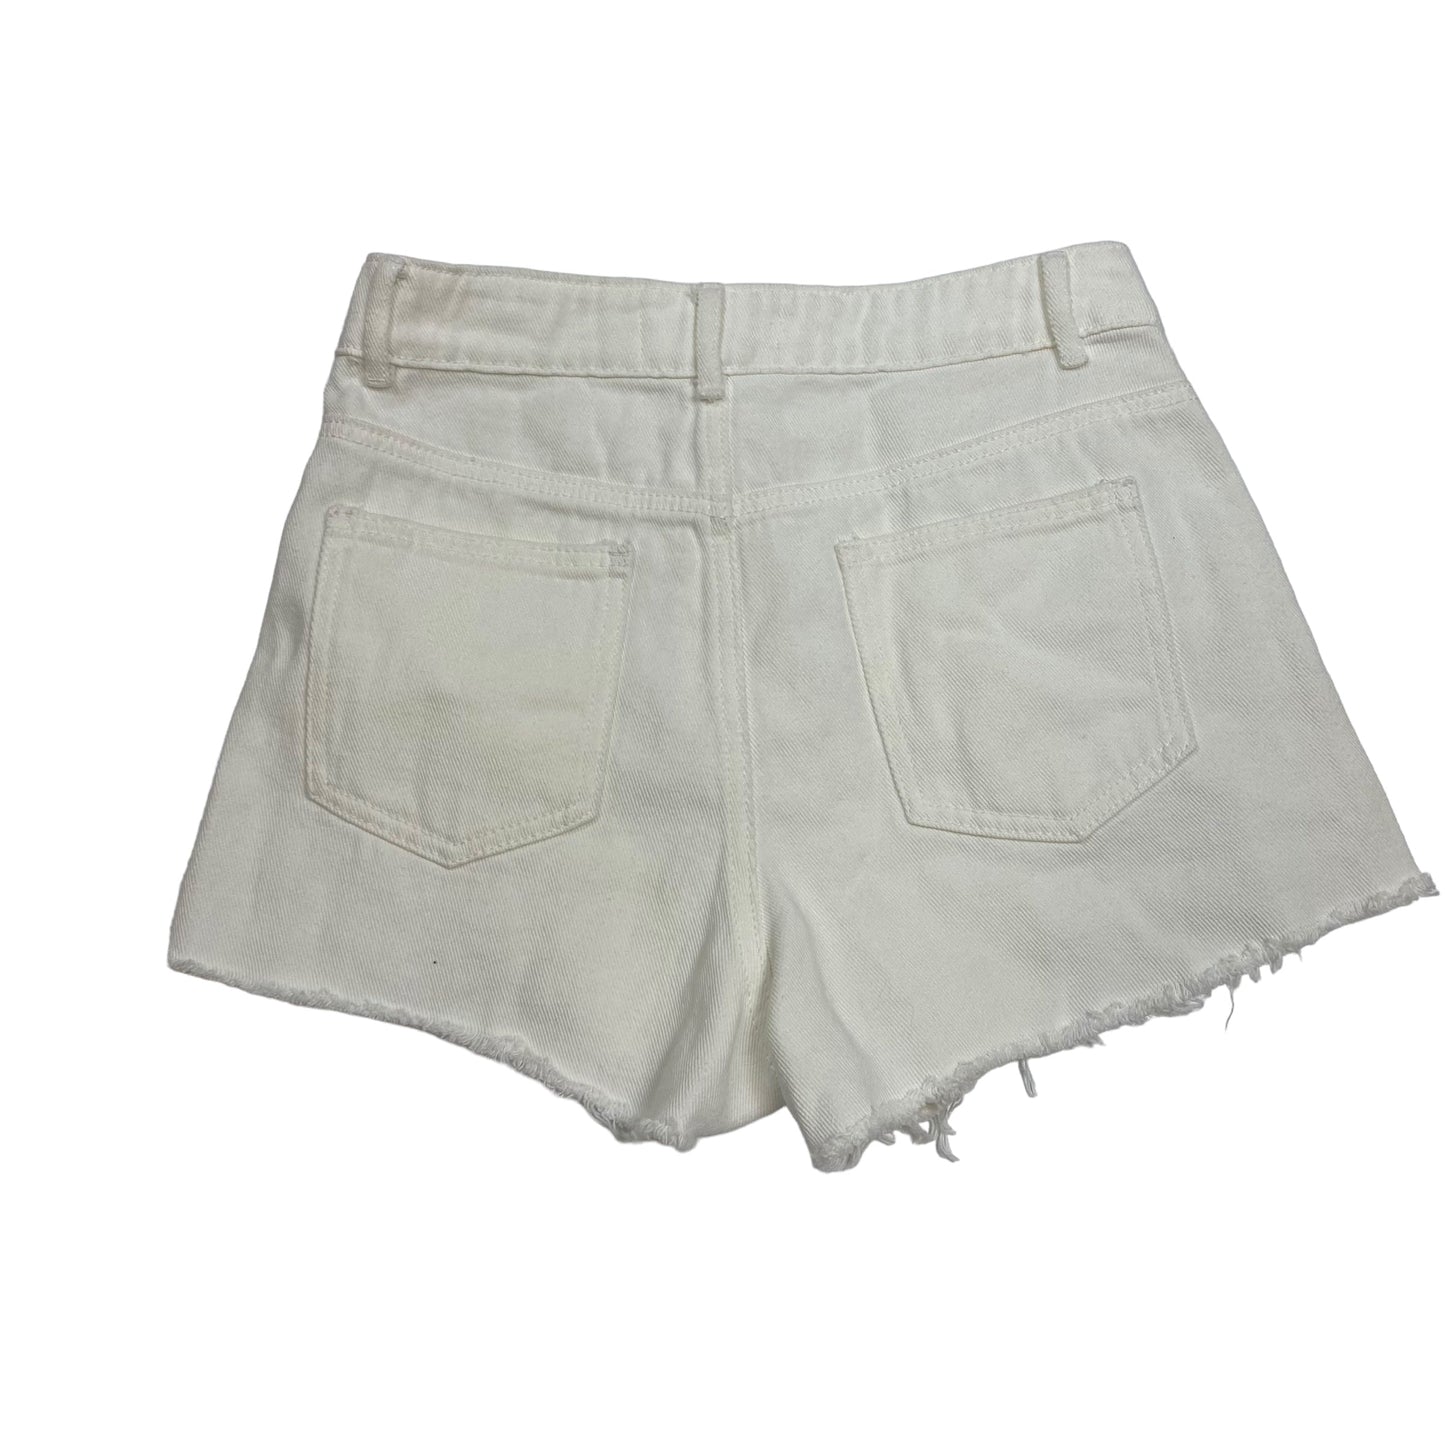 White Shorts Clothes Mentor, Size S